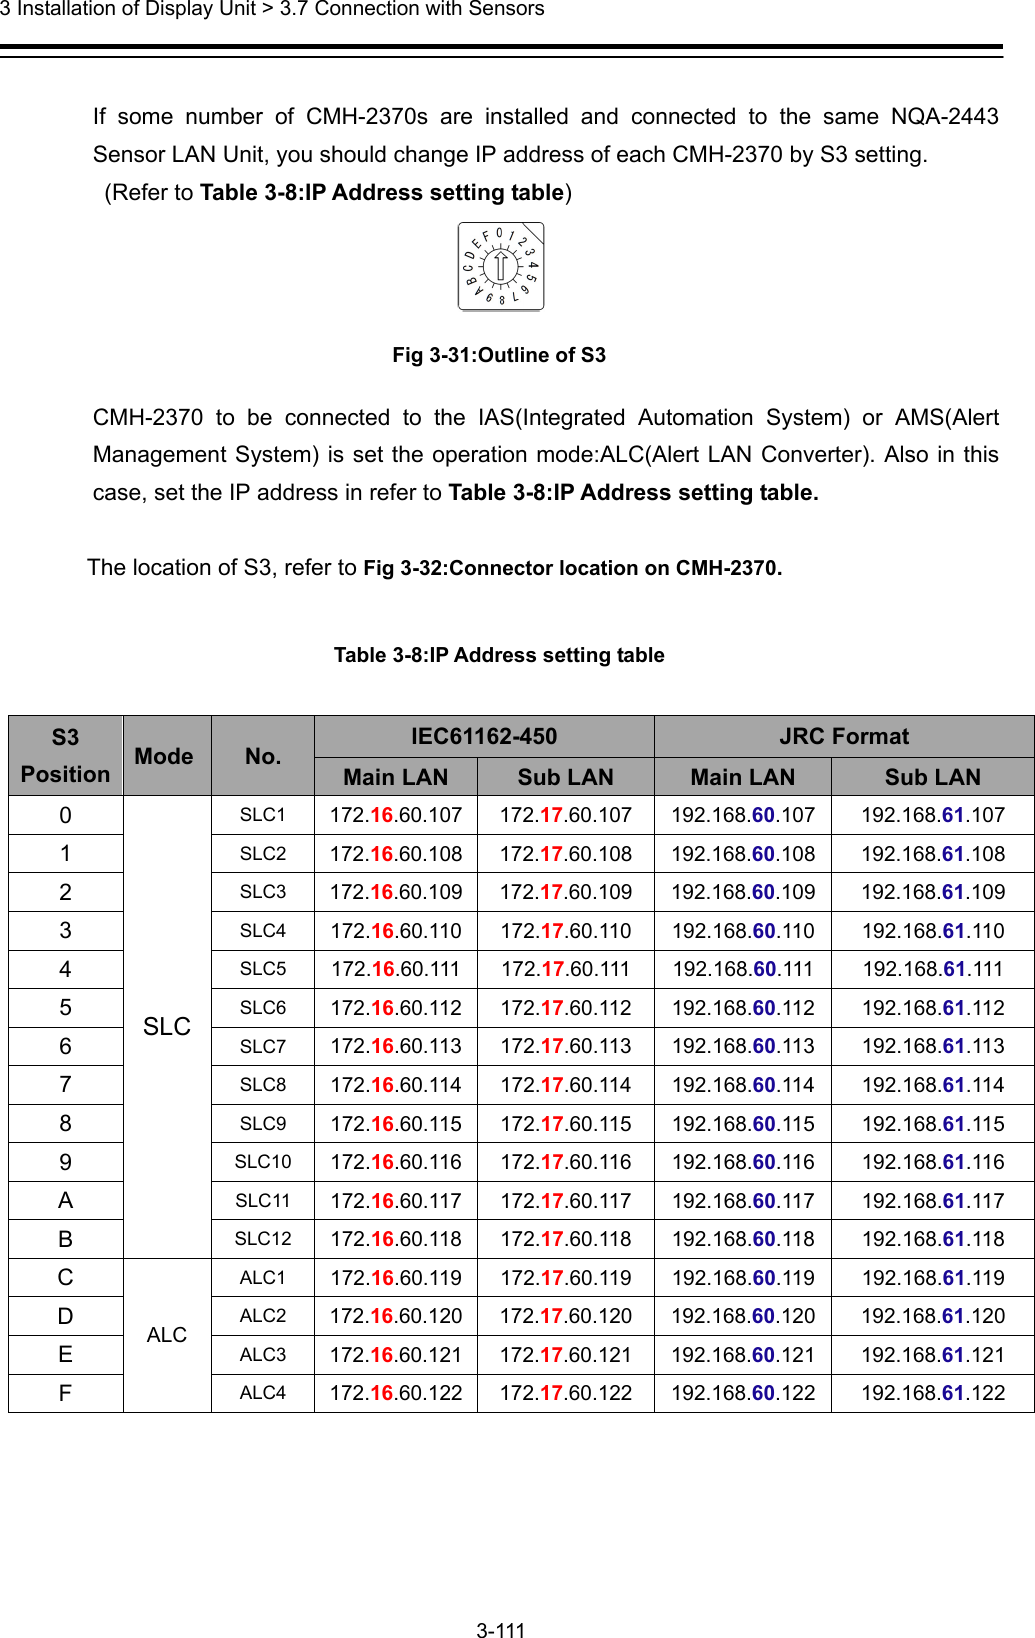  3 Installation of Display Unit &gt; 3.7 Connection with Sensors 3-111   If some number of CMH-2370s are installed and connected to the same NQA-2443 Sensor LAN Unit, you should change IP address of each CMH-2370 by S3 setting.  (Refer to Table 3-8:IP Address setting table)  Fig 3-31:Outline of S3 CMH-2370 to be connected to the IAS(Integrated Automation System) or AMS(Alert Management System) is set the operation mode:ALC(Alert LAN Converter). Also in this case, set the IP address in refer to Table 3-8:IP Address setting table.  The location of S3, refer to Fig 3-32:Connector location on CMH-2370.  Table 3-8:IP Address setting table  S3 Position  Mode  No.  IEC61162-450  JRC Format Main LAN  Sub LAN  Main LAN  Sub LAN 0 SLC SLC1  172.16.60.107 172.17.60.107 192.168.60.107 192.168.61.107 1  SLC2  172.16.60.108 172.17.60.108 192.168.60.108 192.168.61.108 2  SLC3  172.16.60.109 172.17.60.109 192.168.60.109 192.168.61.109 3  SLC4  172.16.60.110 172.17.60.110 192.168.60.110 192.168.61.110 4  SLC5  172.16.60.111 172.17.60.111 192.168.60.111 192.168.61.111 5  SLC6  172.16.60.112 172.17.60.112 192.168.60.112 192.168.61.112 6  SLC7  172.16.60.113 172.17.60.113 192.168.60.113 192.168.61.113 7  SLC8  172.16.60.114 172.17.60.114 192.168.60.114 192.168.61.114 8  SLC9  172.16.60.115 172.17.60.115 192.168.60.115 192.168.61.115 9  SLC10  172.16.60.116 172.17.60.116 192.168.60.116 192.168.61.116 A  SLC11  172.16.60.117 172.17.60.117 192.168.60.117 192.168.61.117 B  SLC12  172.16.60.118 172.17.60.118 192.168.60.118 192.168.61.118 C ALC ALC1  172.16.60.119 172.17.60.119 192.168.60.119 192.168.61.119 D  ALC2  172.16.60.120 172.17.60.120 192.168.60.120 192.168.61.120 E  ALC3  172.16.60.121 172.17.60.121 192.168.60.121 192.168.61.121 F  ALC4  172.16.60.122 172.17.60.122 192.168.60.122 192.168.61.122 